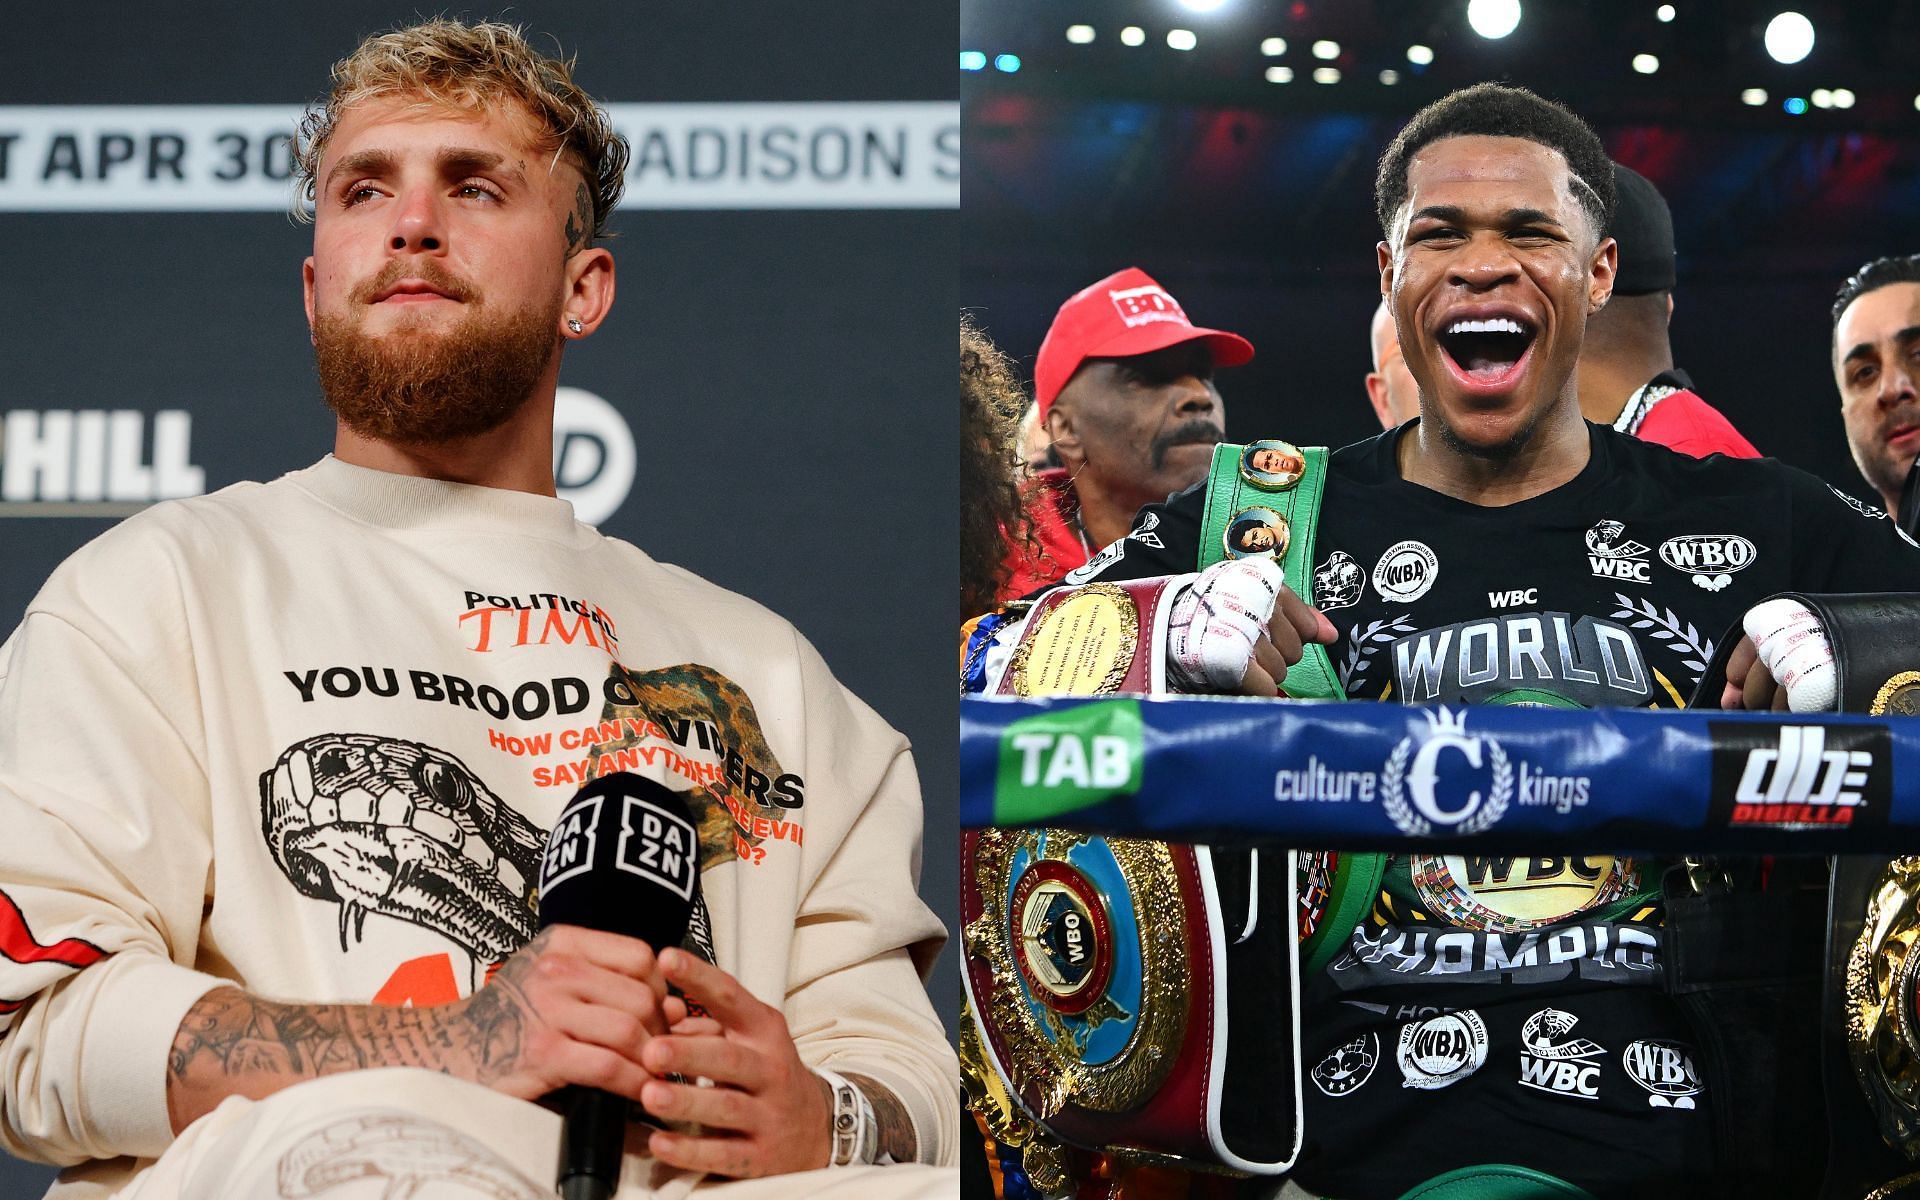 Jake Paul (left) and Devin Haney (right) [Images via Getty Images]